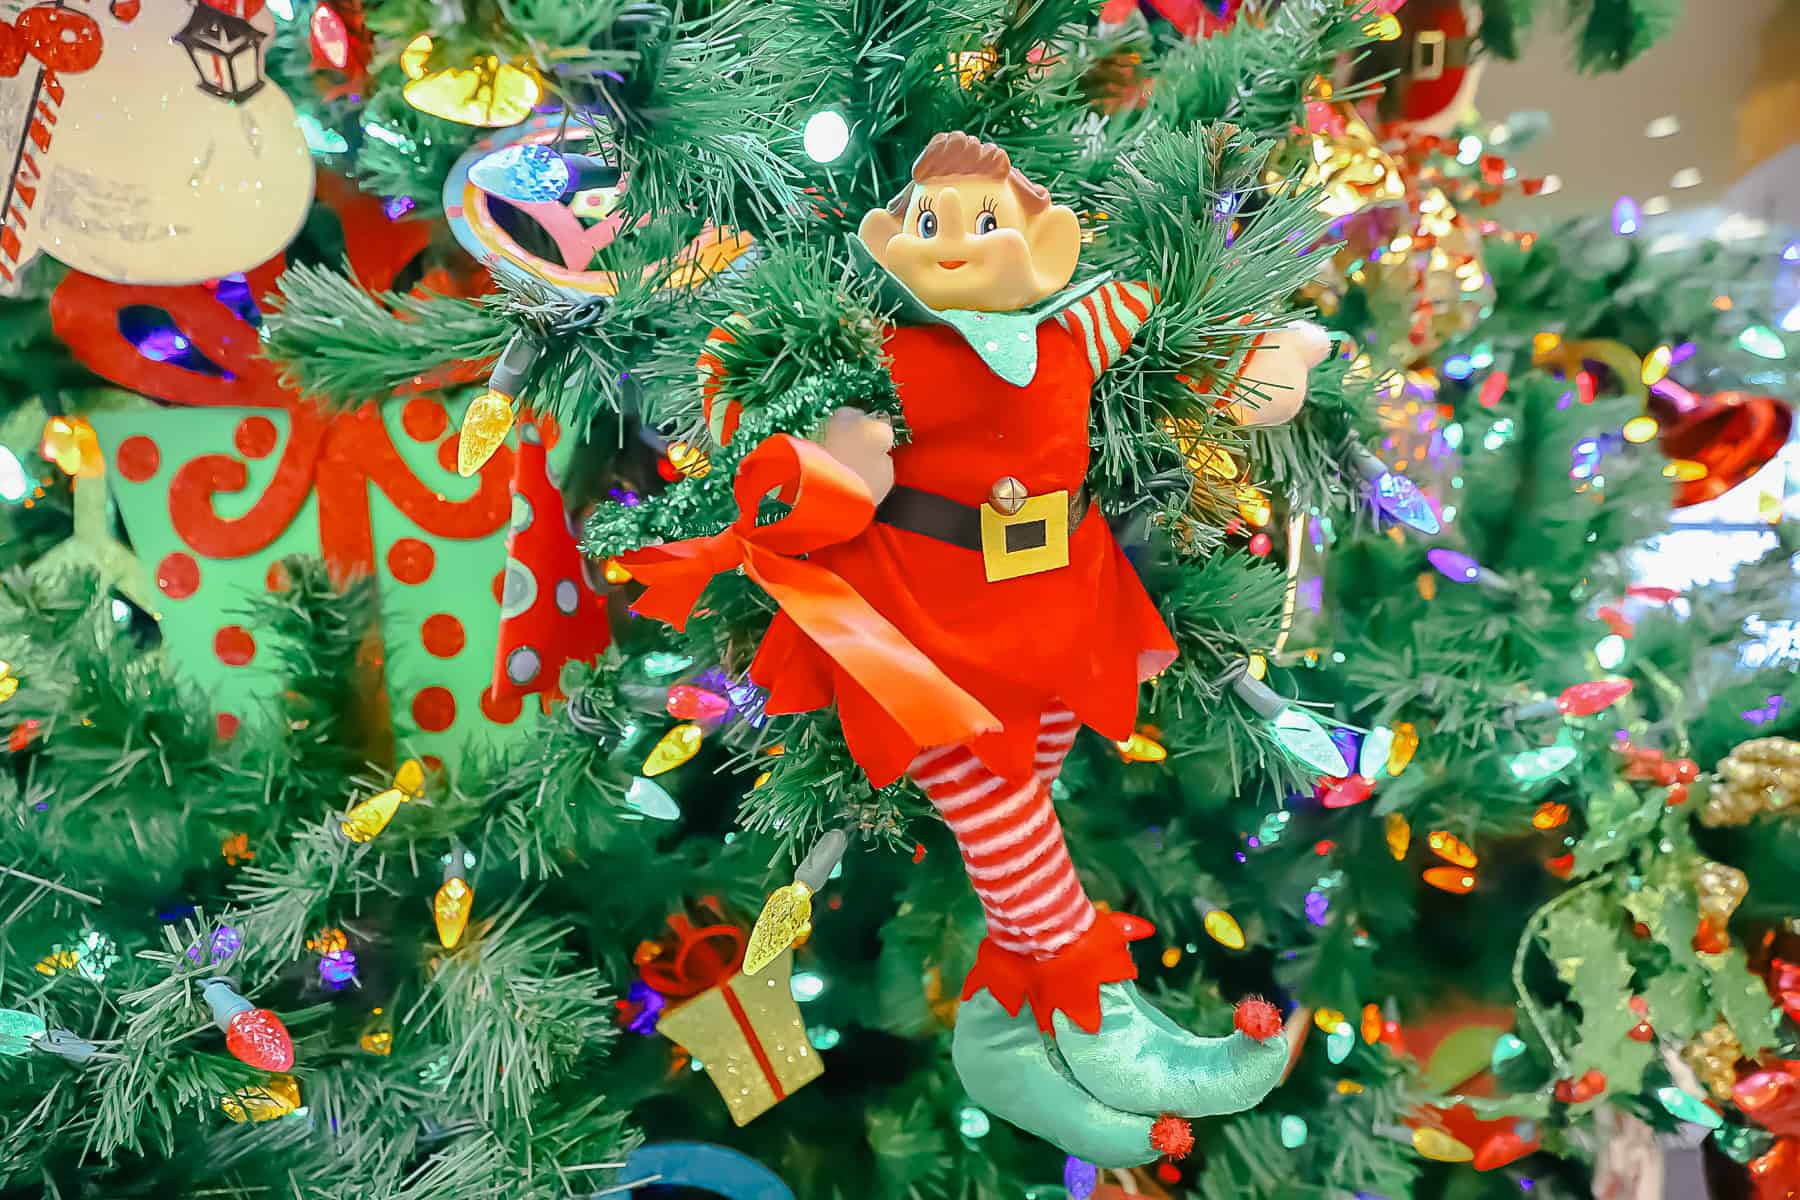 Elves places on the branches of the tree at Pop Century 